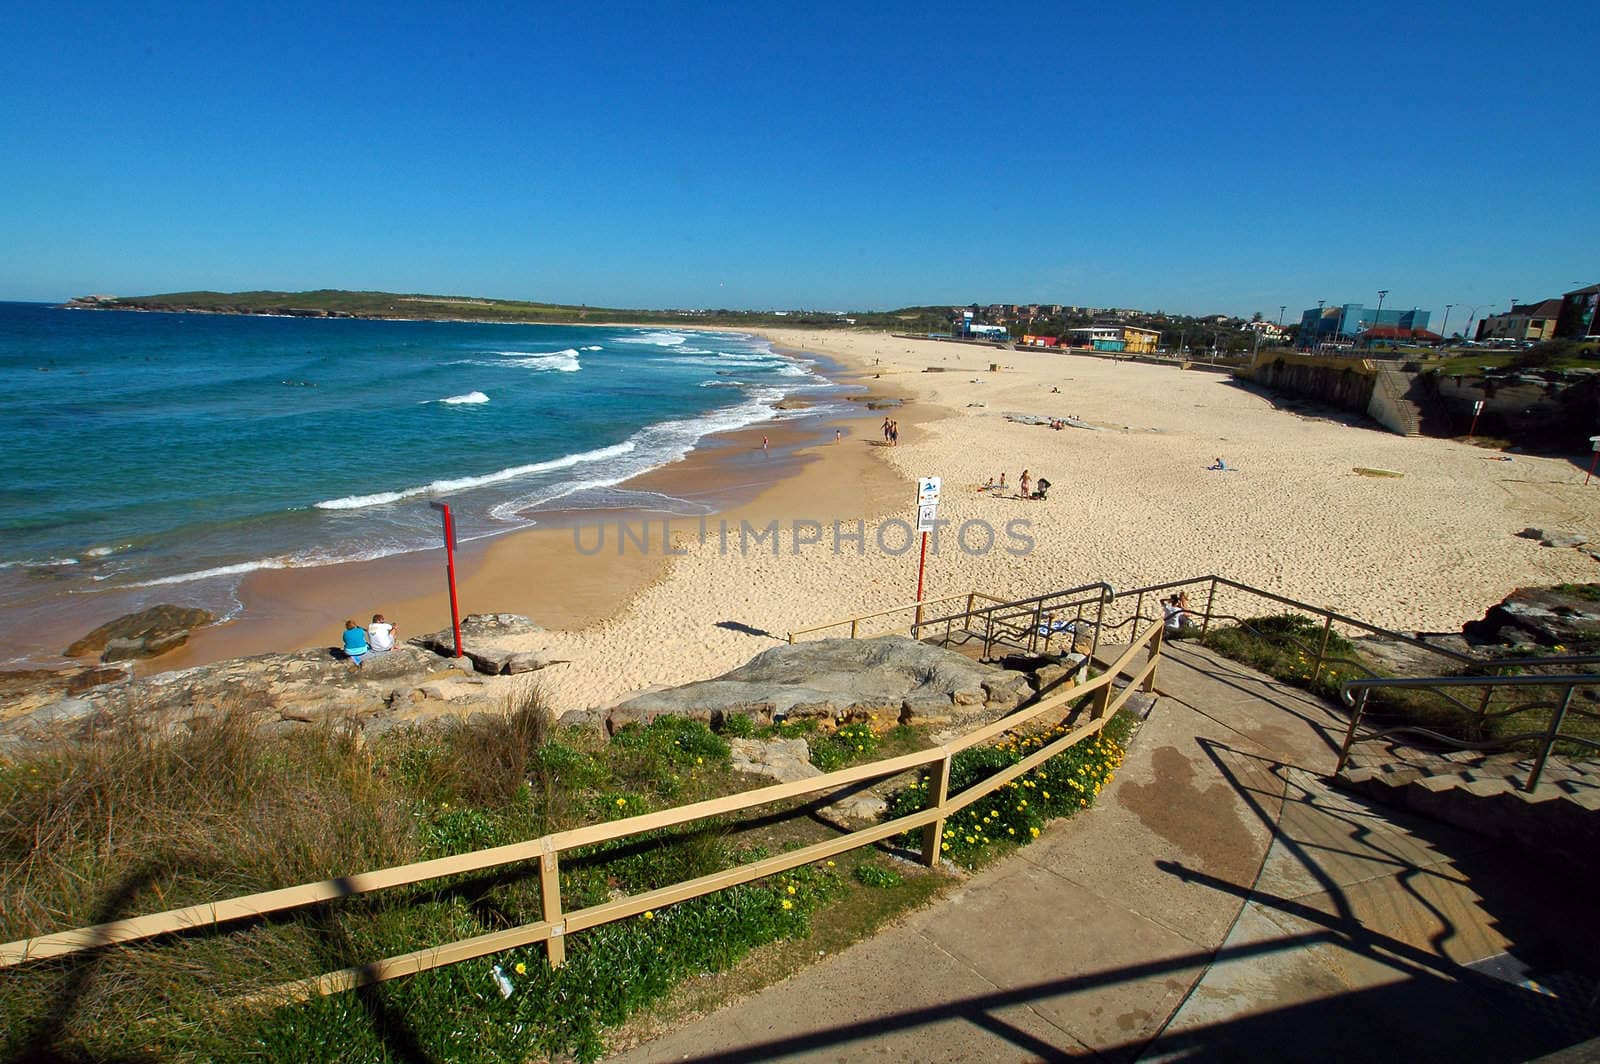 Maroubra beach in Sydney, Nice cloudless day